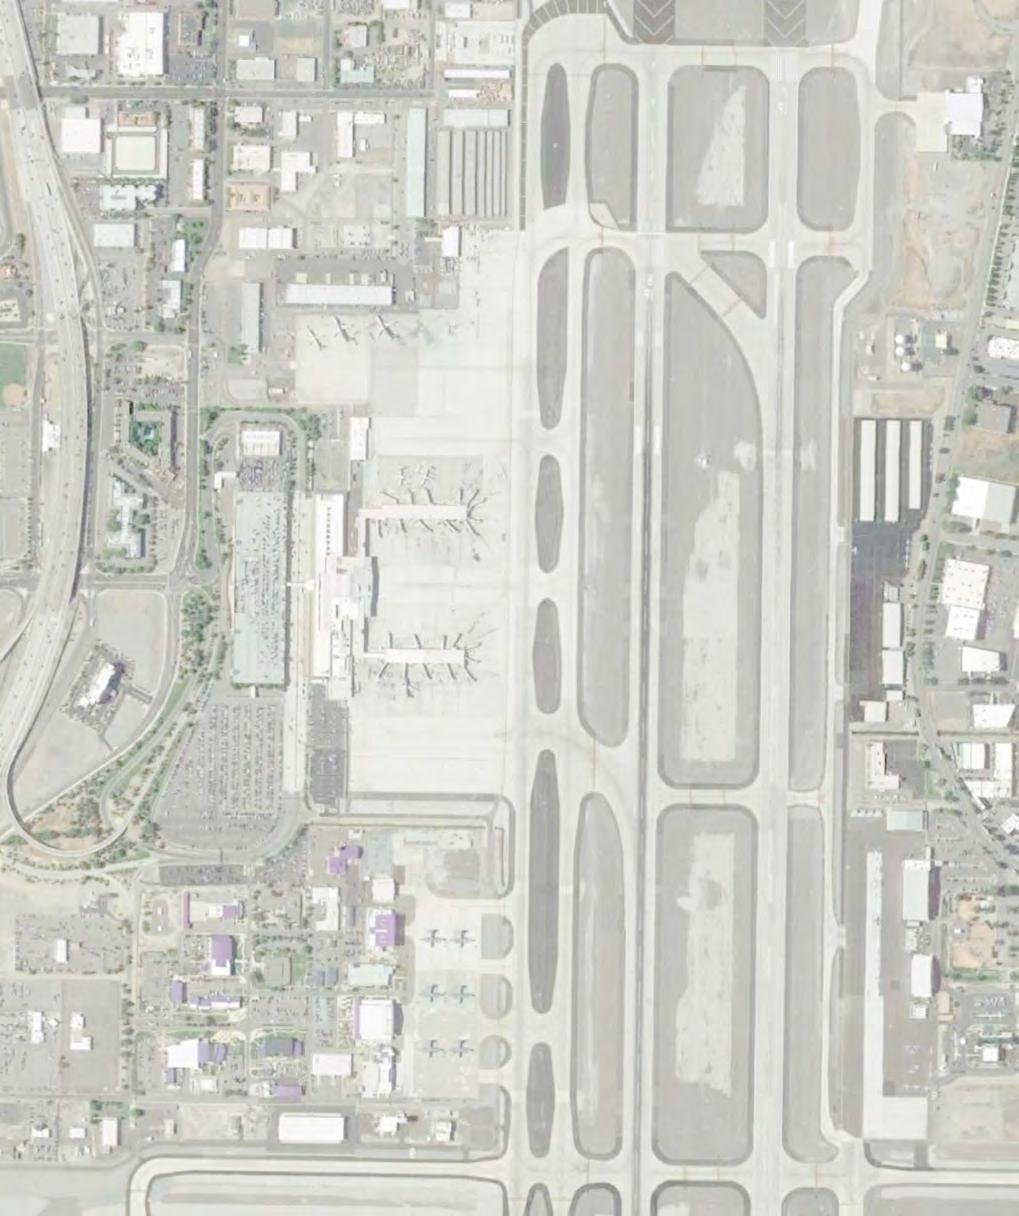 LEGEND TOFA N RNO Property Boundary Active Airfield Pavement Taxiway Object Free Area Taxiway Design Group 2 Taxiway Design Group 4 Taxiway Design Group 5 FAA Taxiway Hot Spot Non-Standard Condition